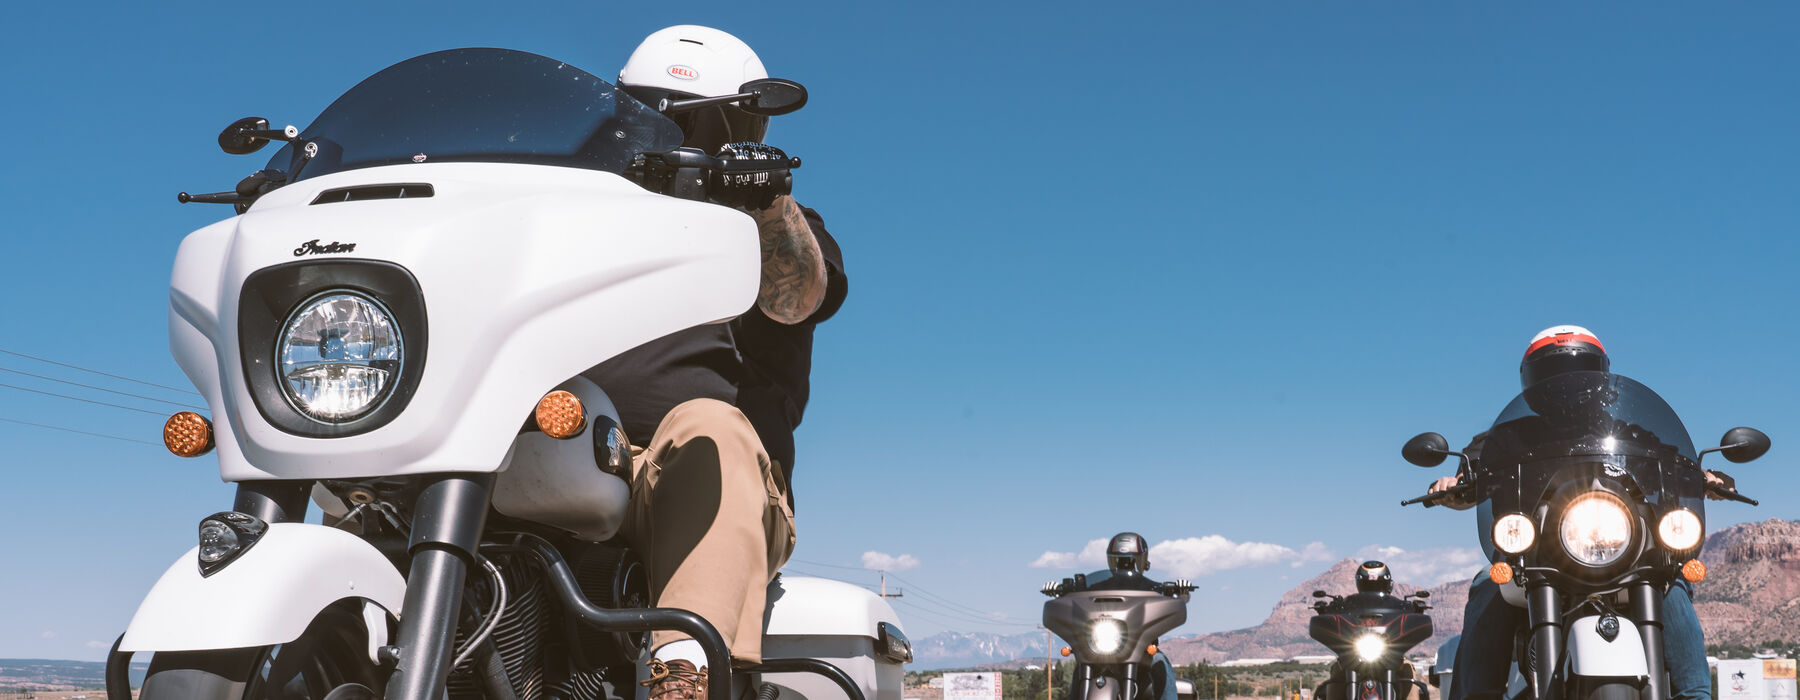 Motorcycle Bluetooth Speakers & Headsets | Cardo Systems